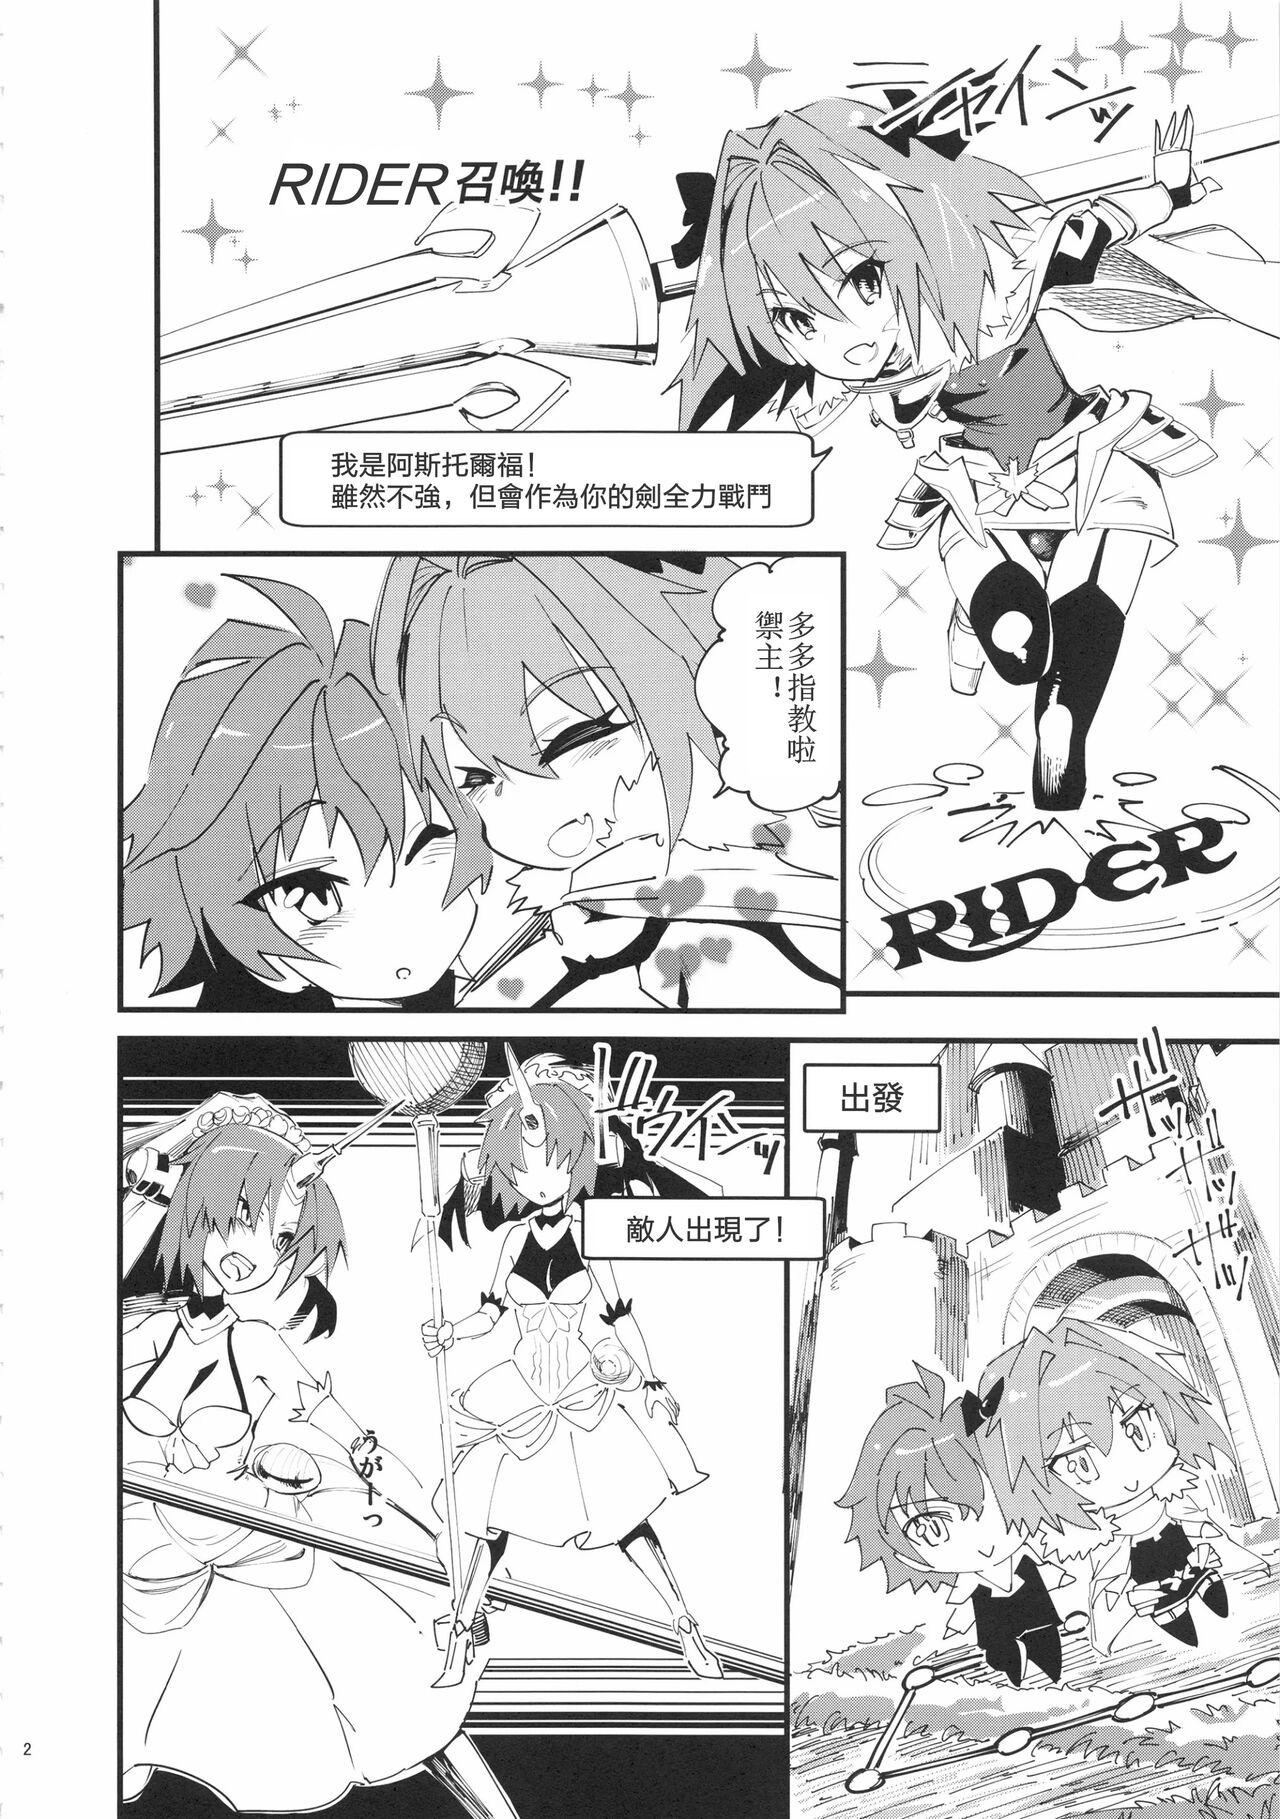 Flaca CLASS CHANGE!! Brave Astolfo - Fate apocrypha Chica - Page 4